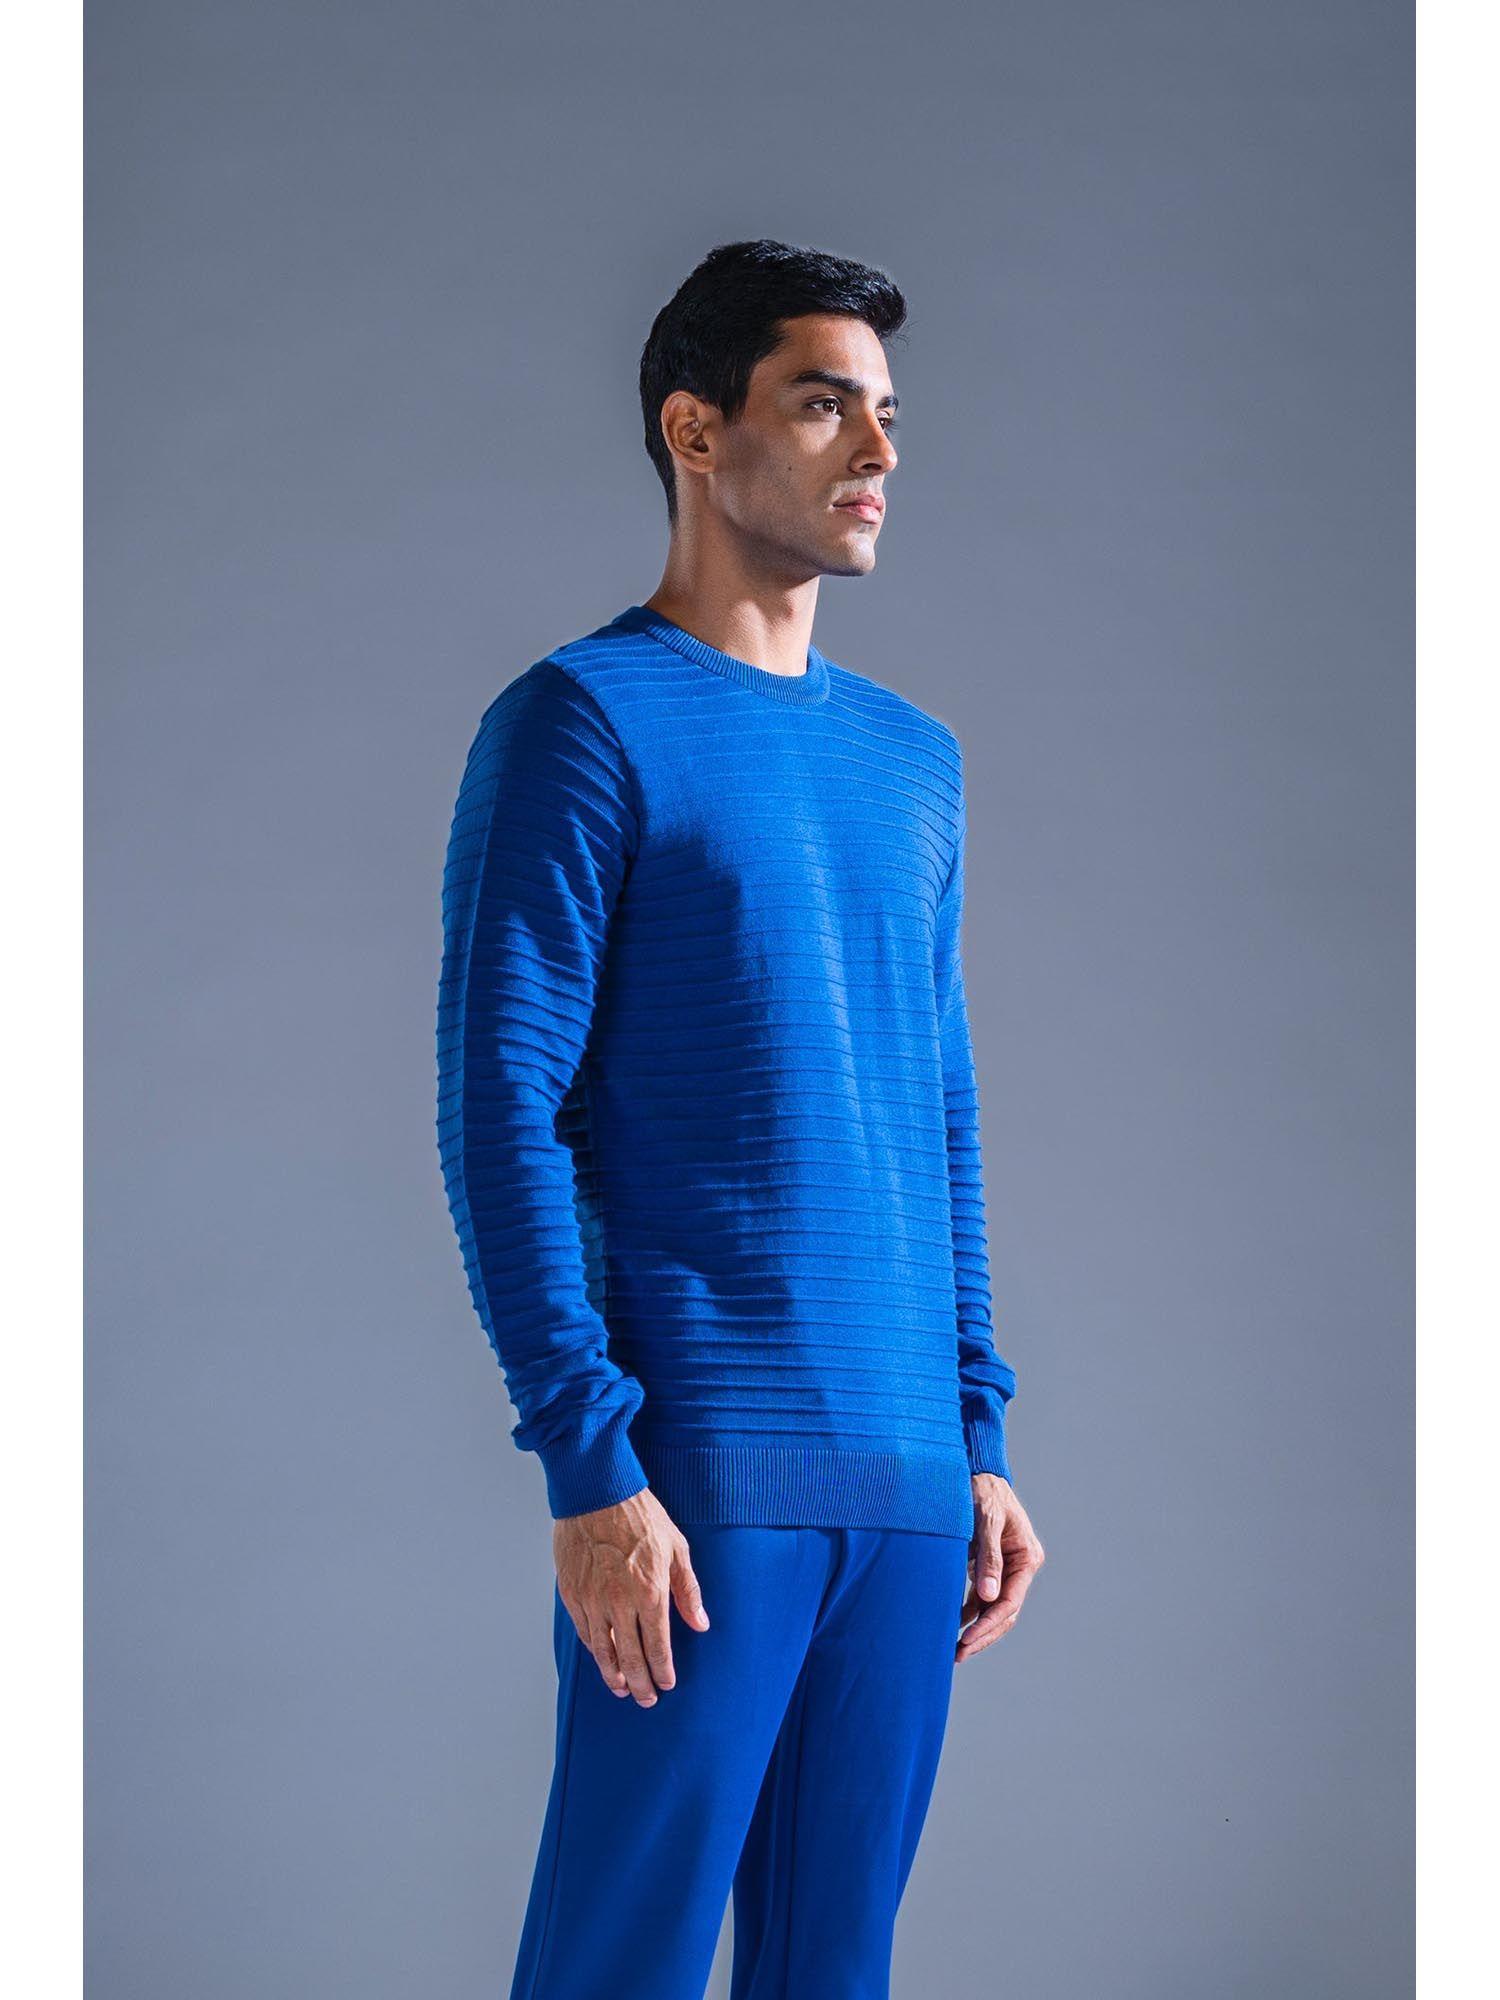 cobalt blue cotton knit sweater classic pull over